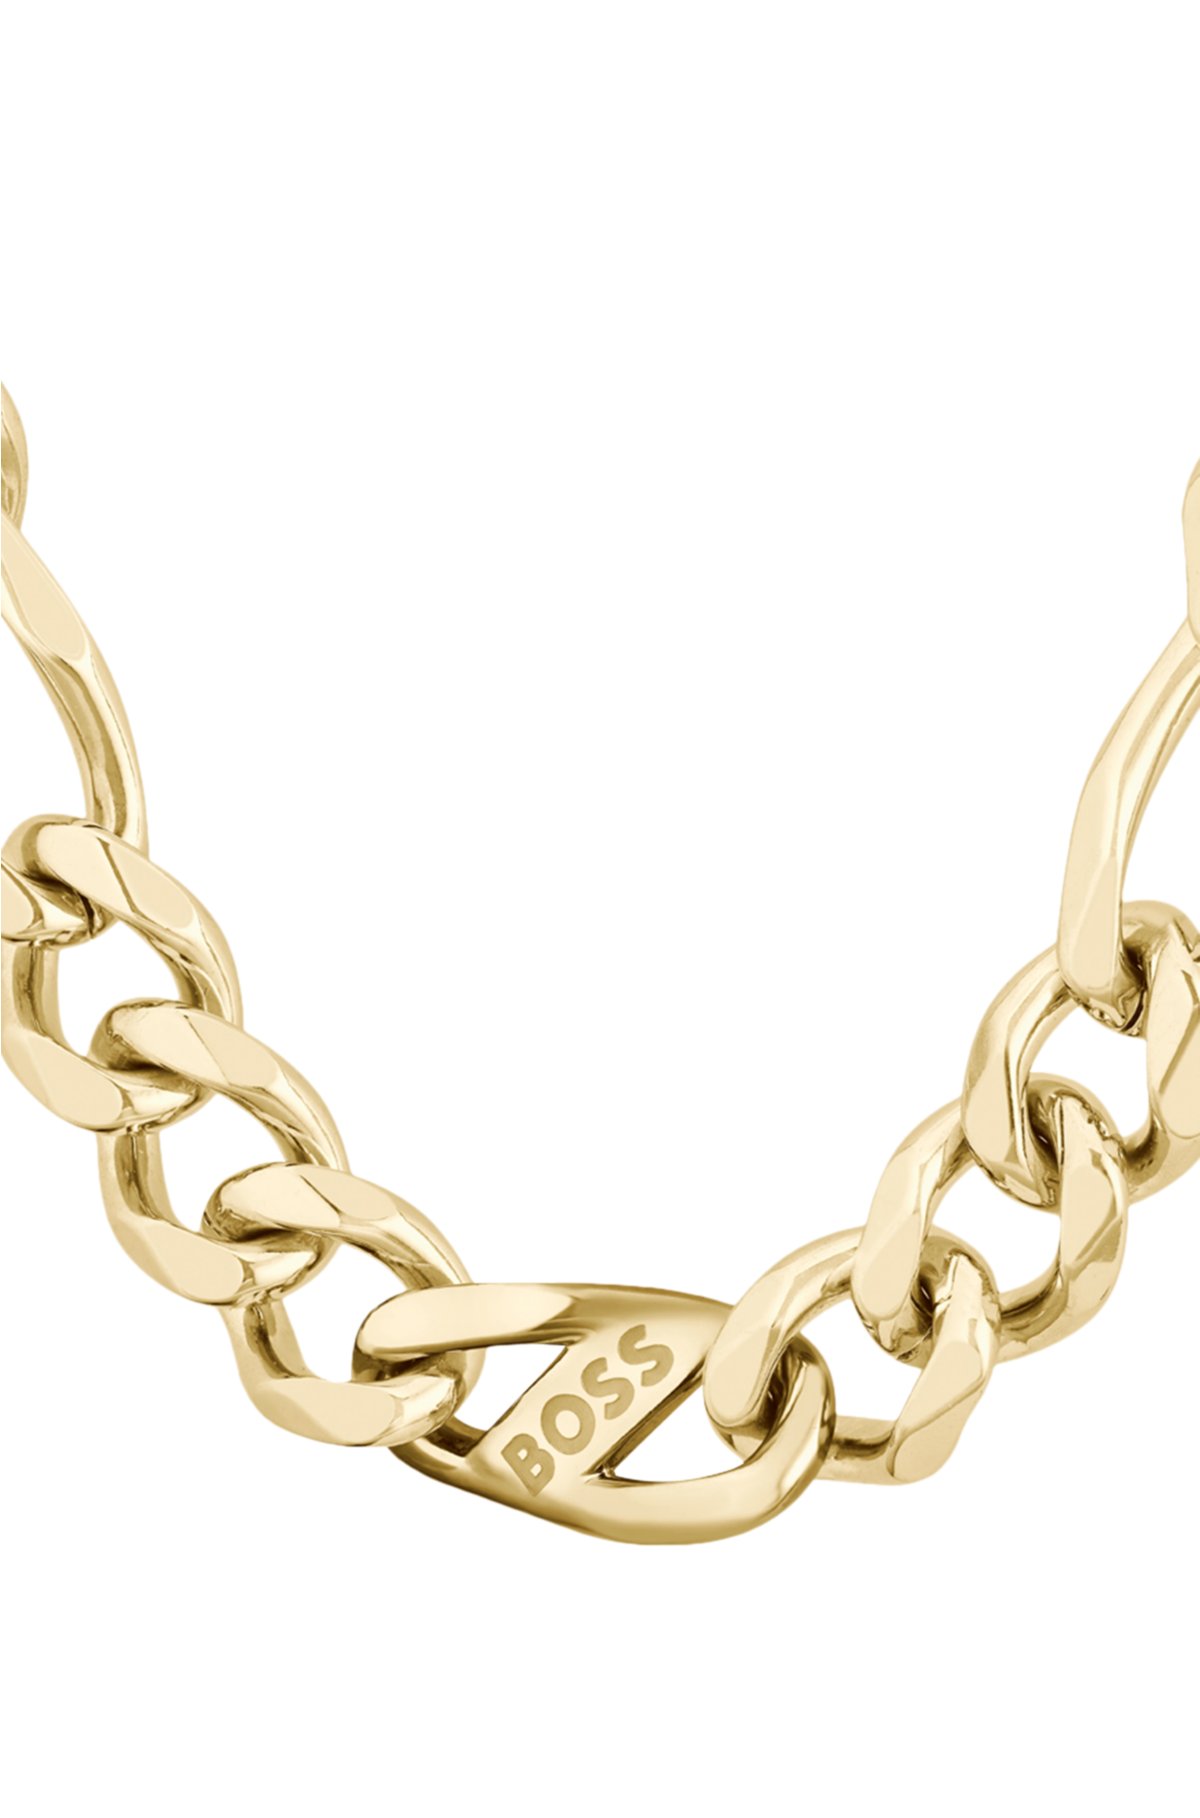 Gold-tone figaro-chain necklace with branded link, Gold tone